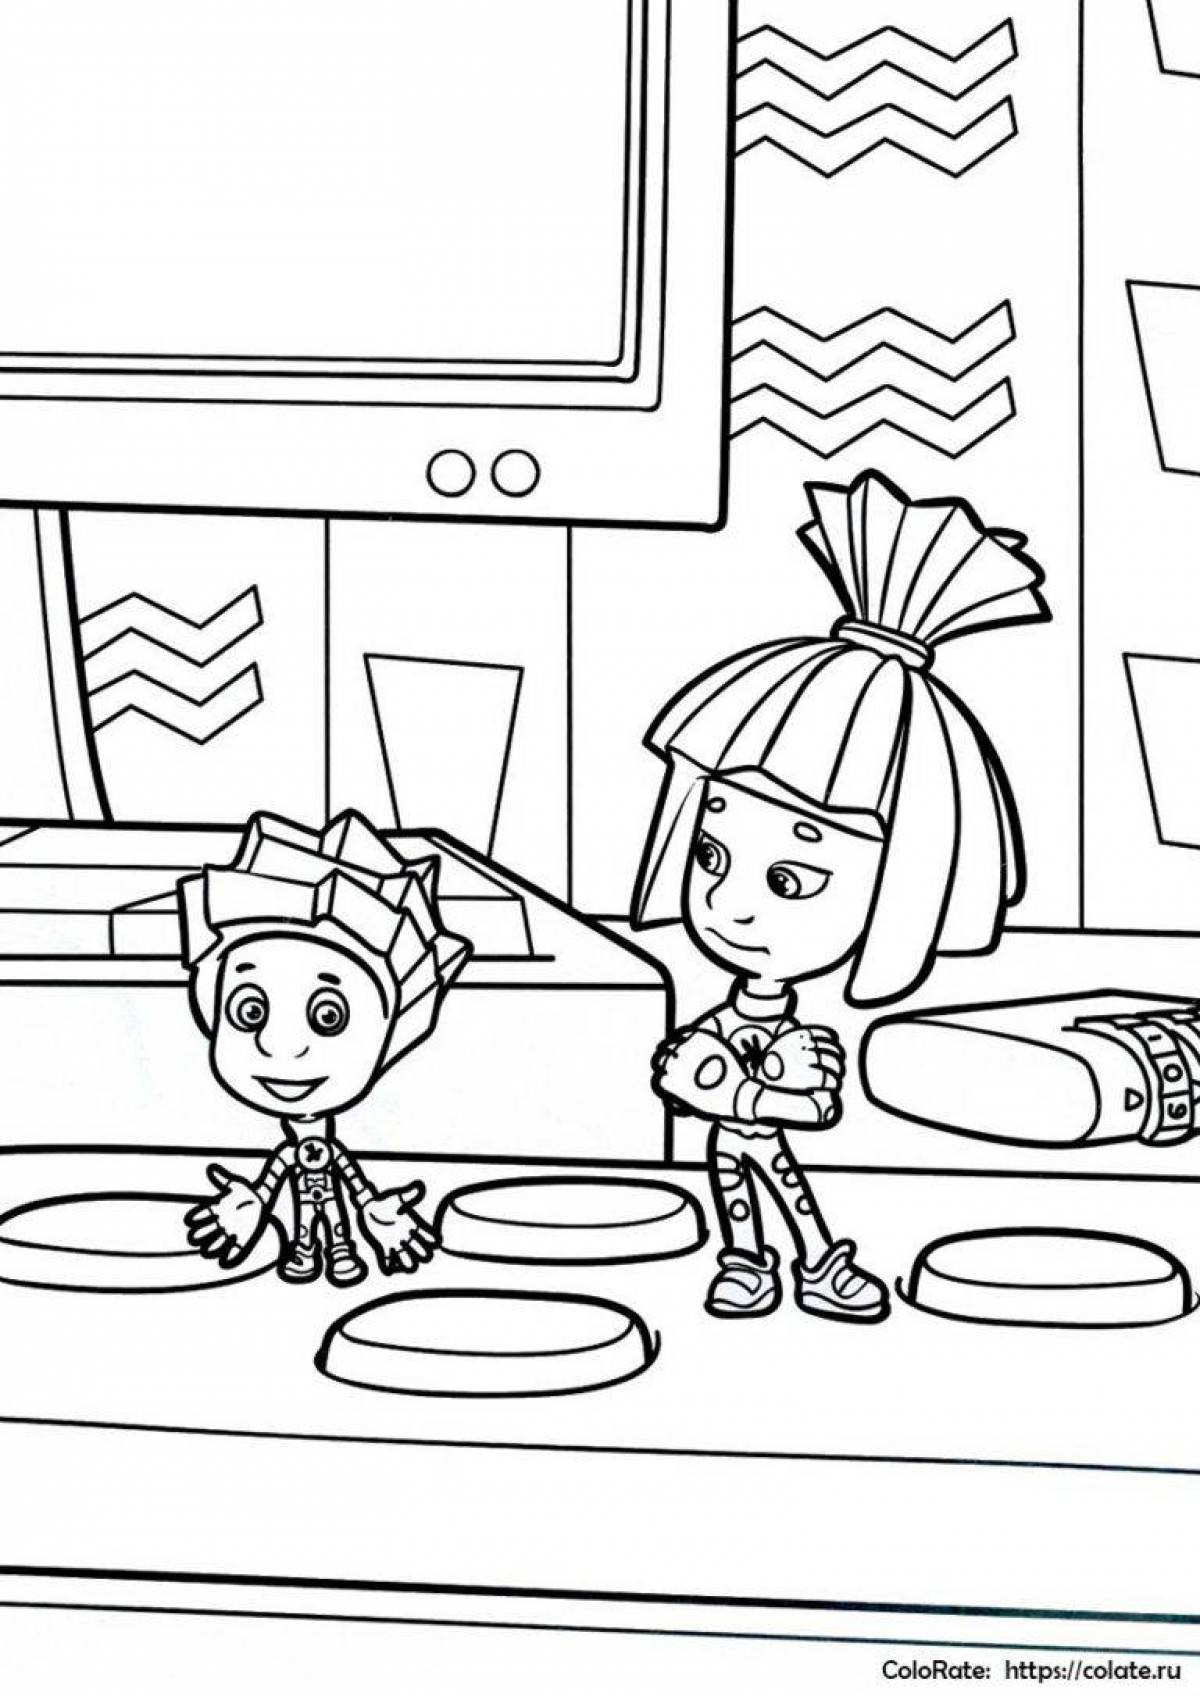 Color fixies coloring pages